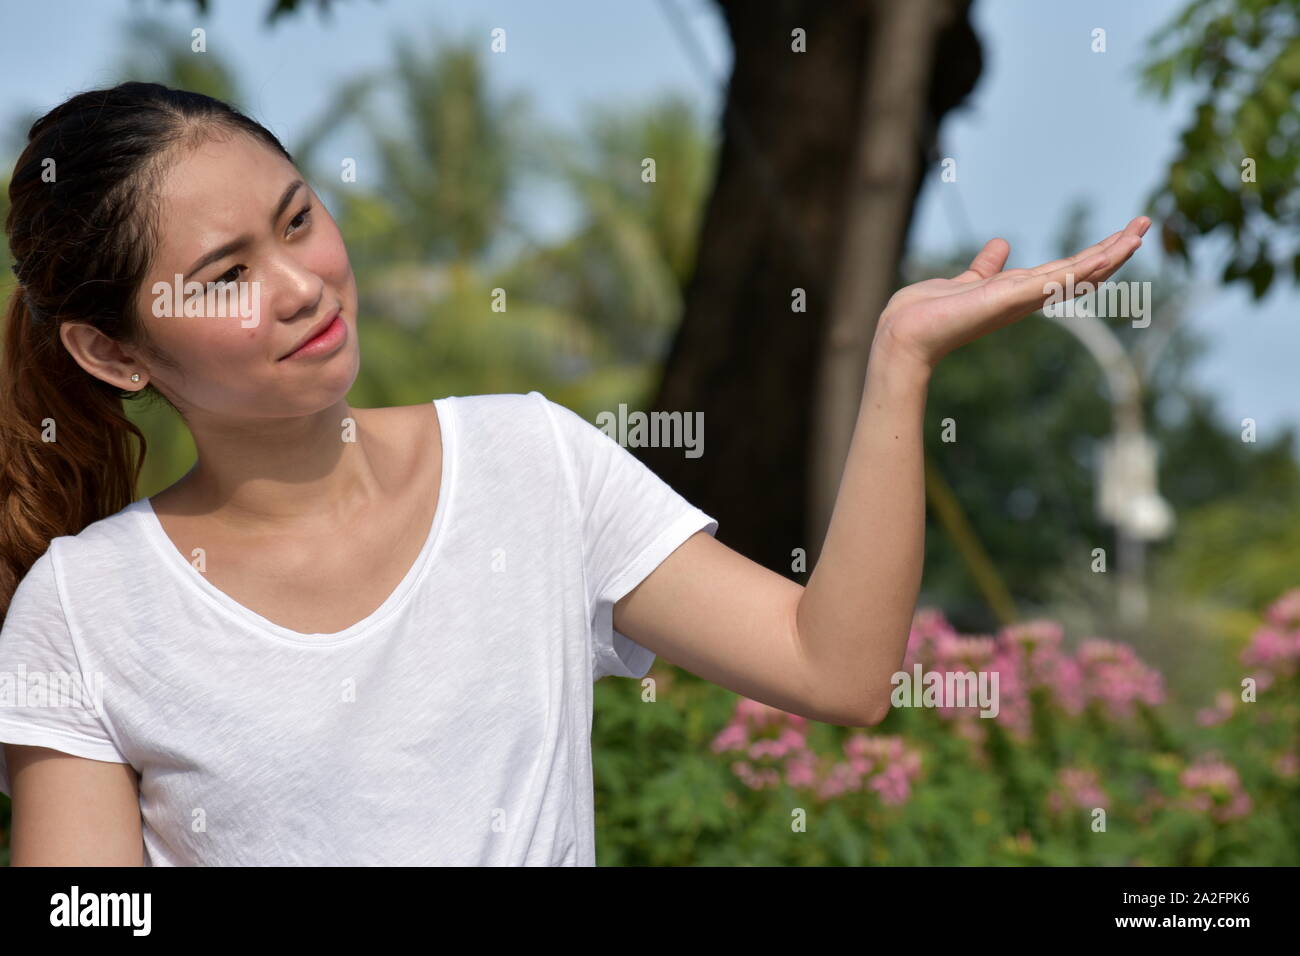 An Undecided Young Female Stock Photo